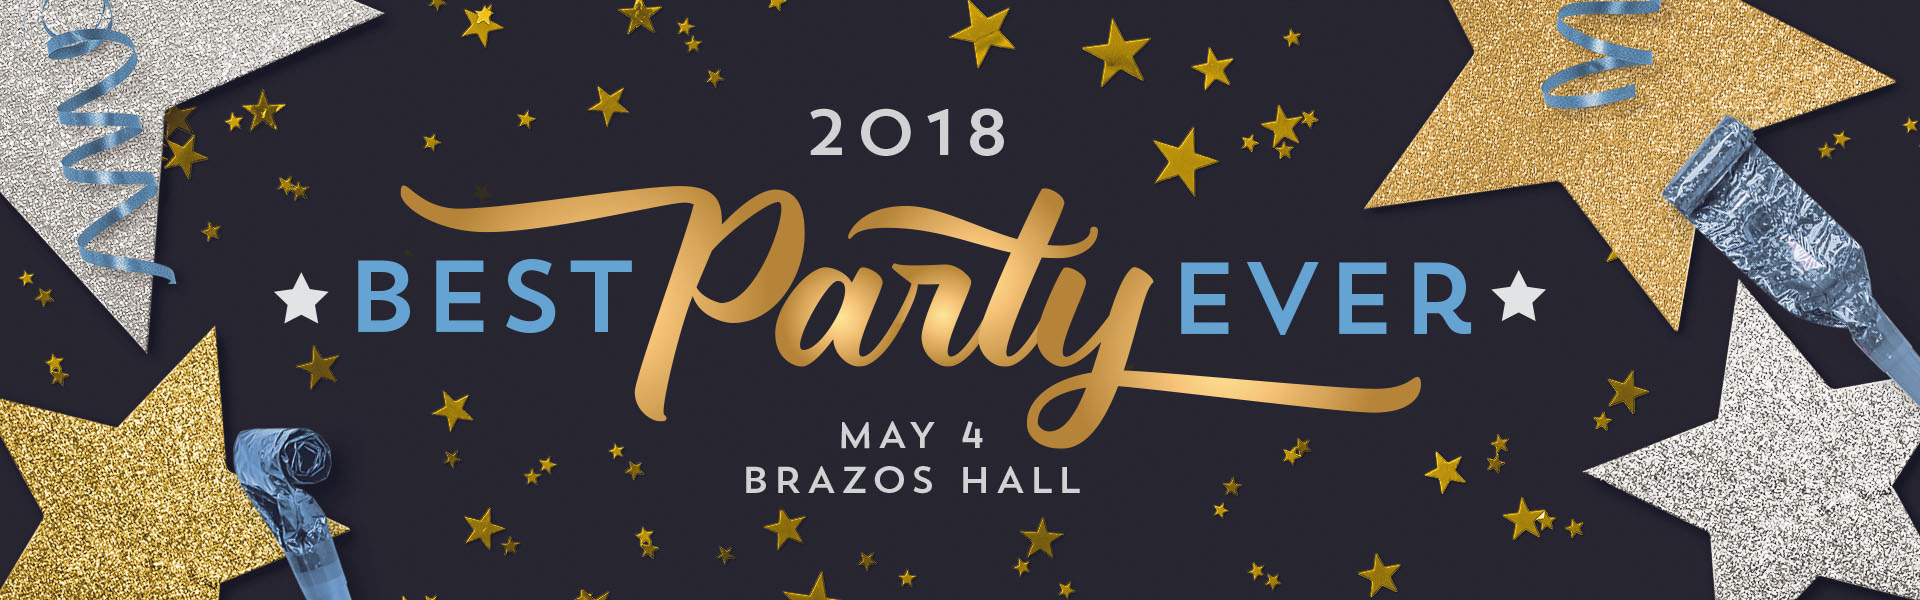 Don’t miss the 2018 Best Party Ever!